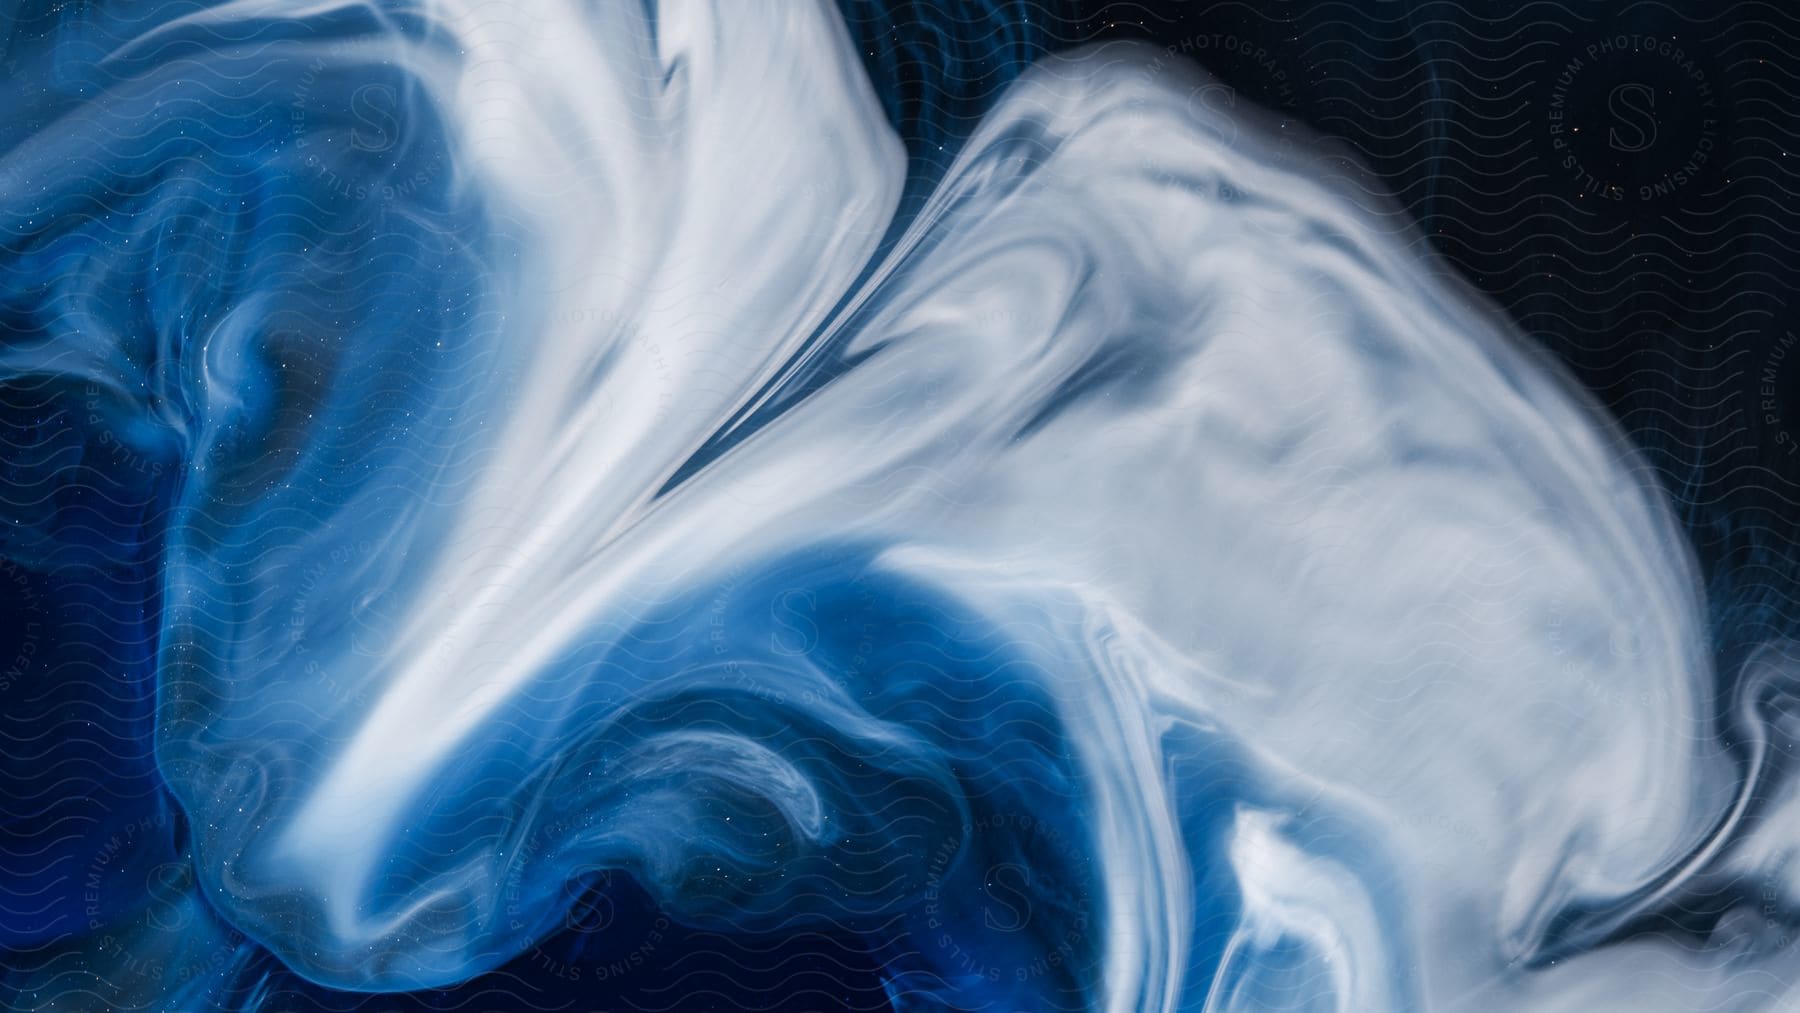 Abstract liquid marble art painting with blackblue background and spilled white acrylic paint